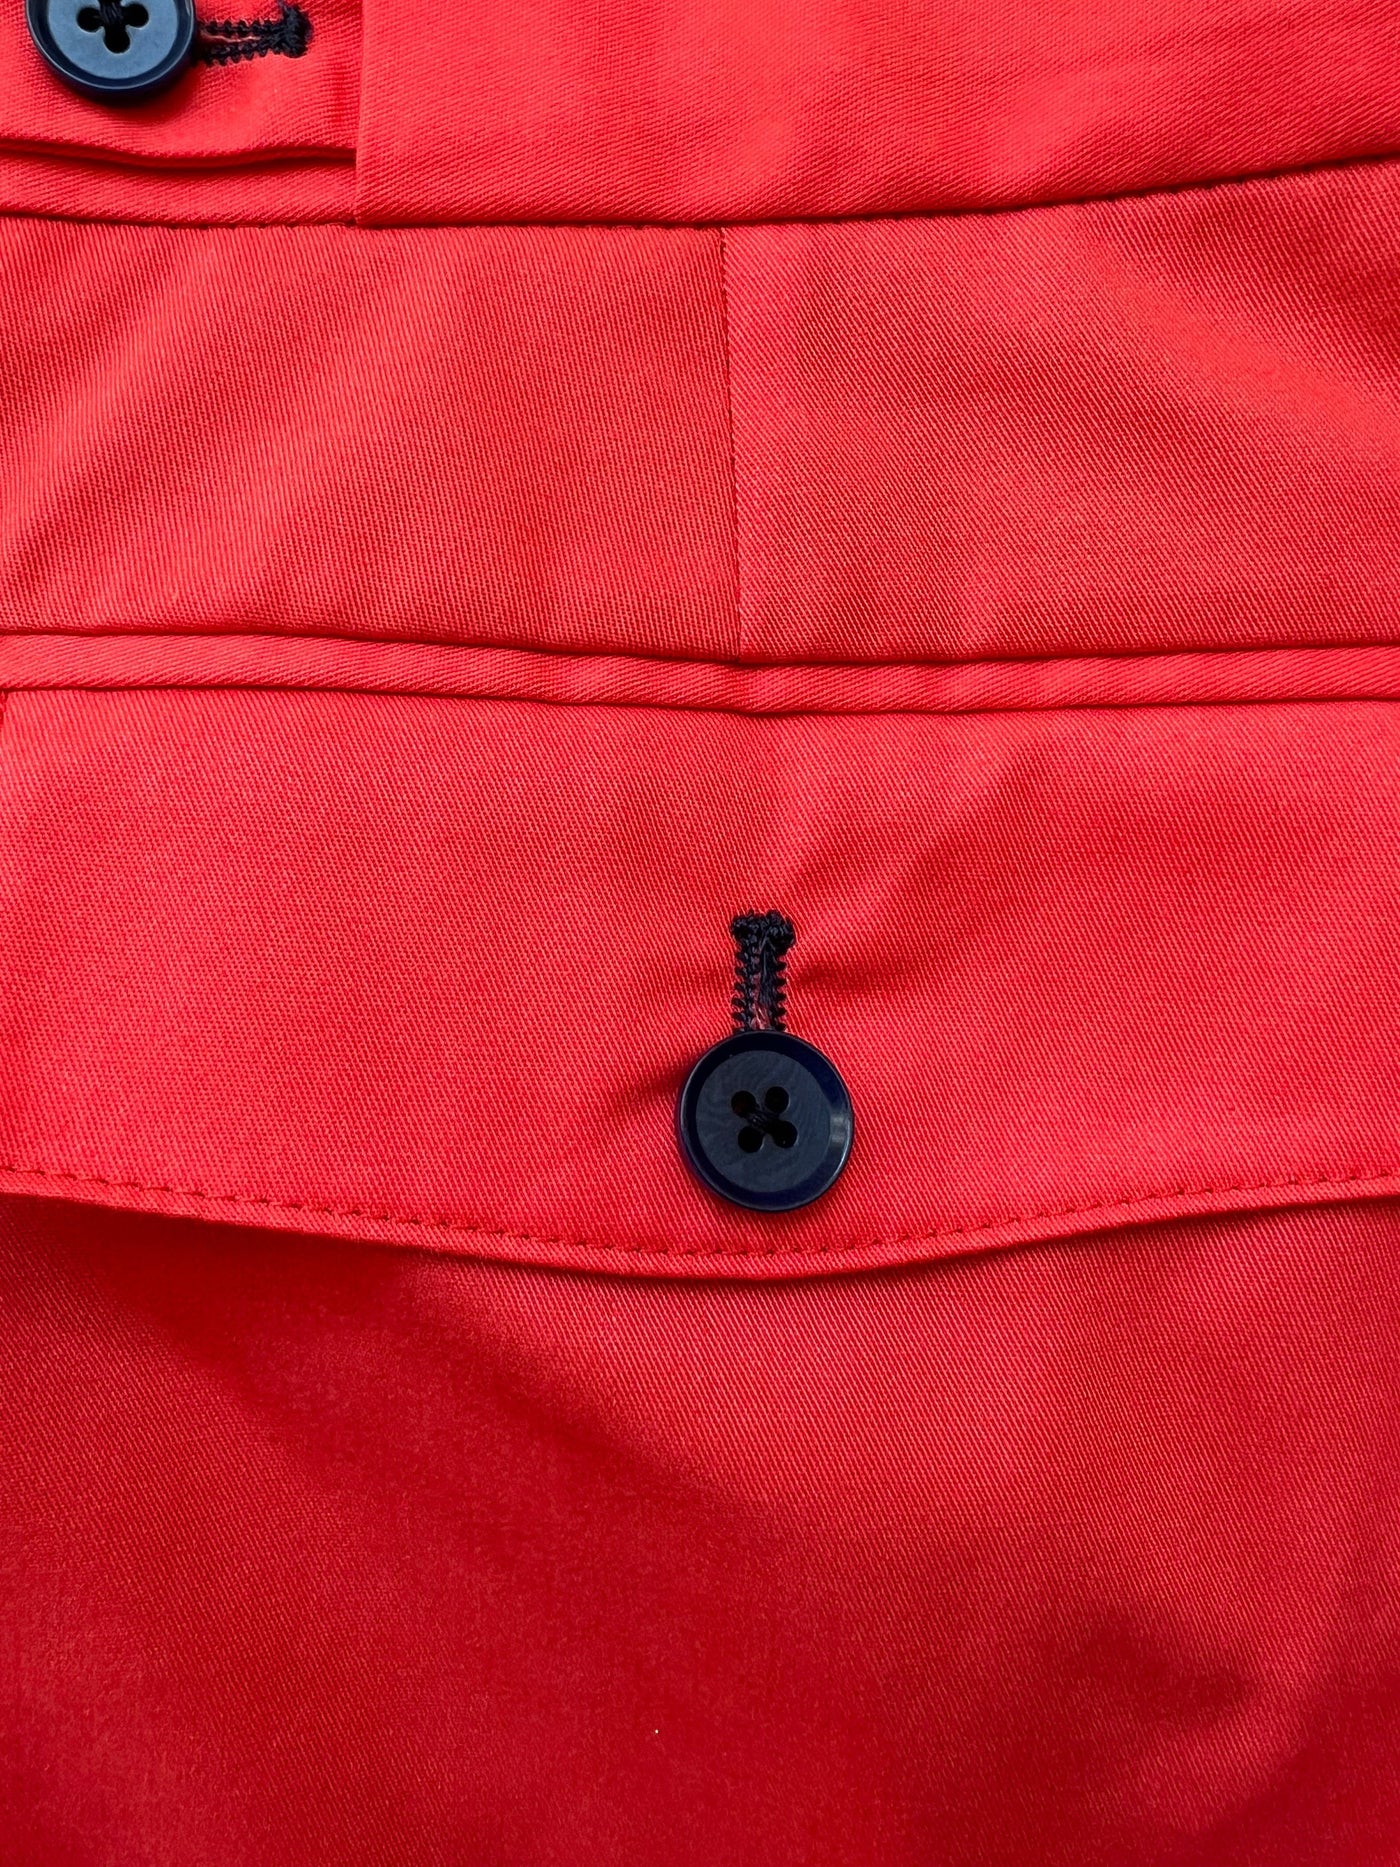 Red Cotton Trouser